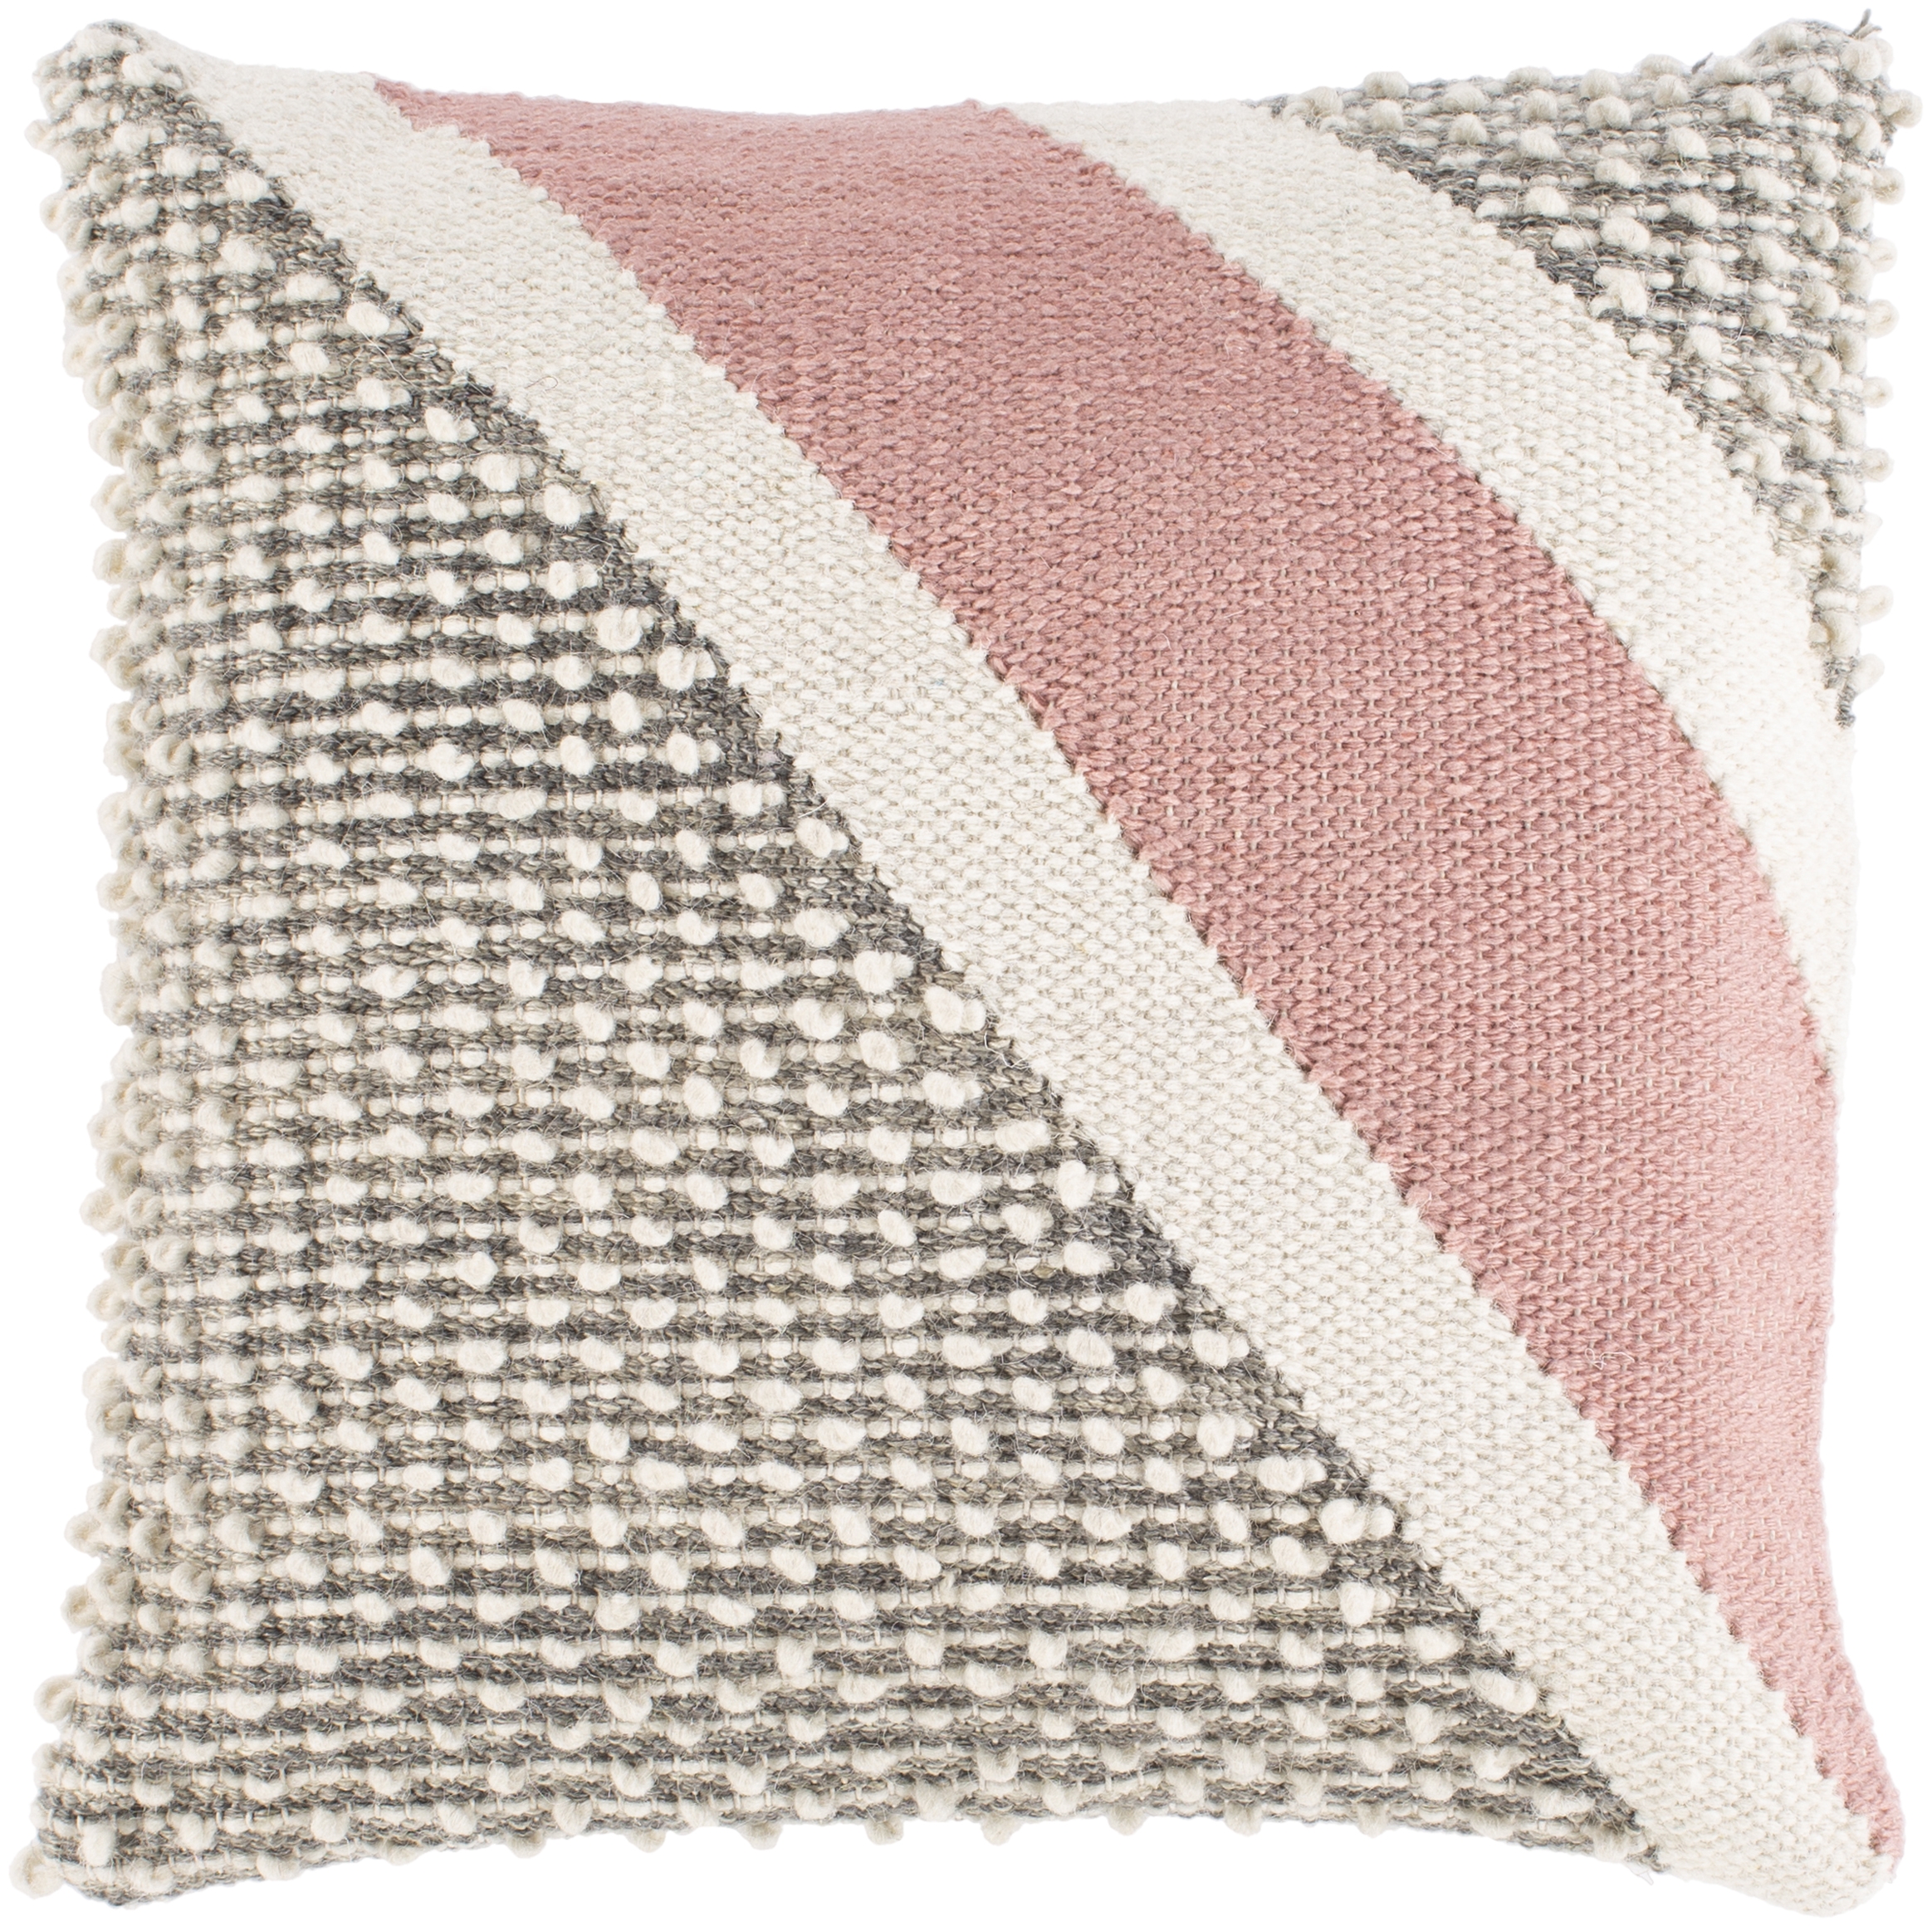 Amaretta Throw Pillow, 20" x 20", pillow cover only - Image 0